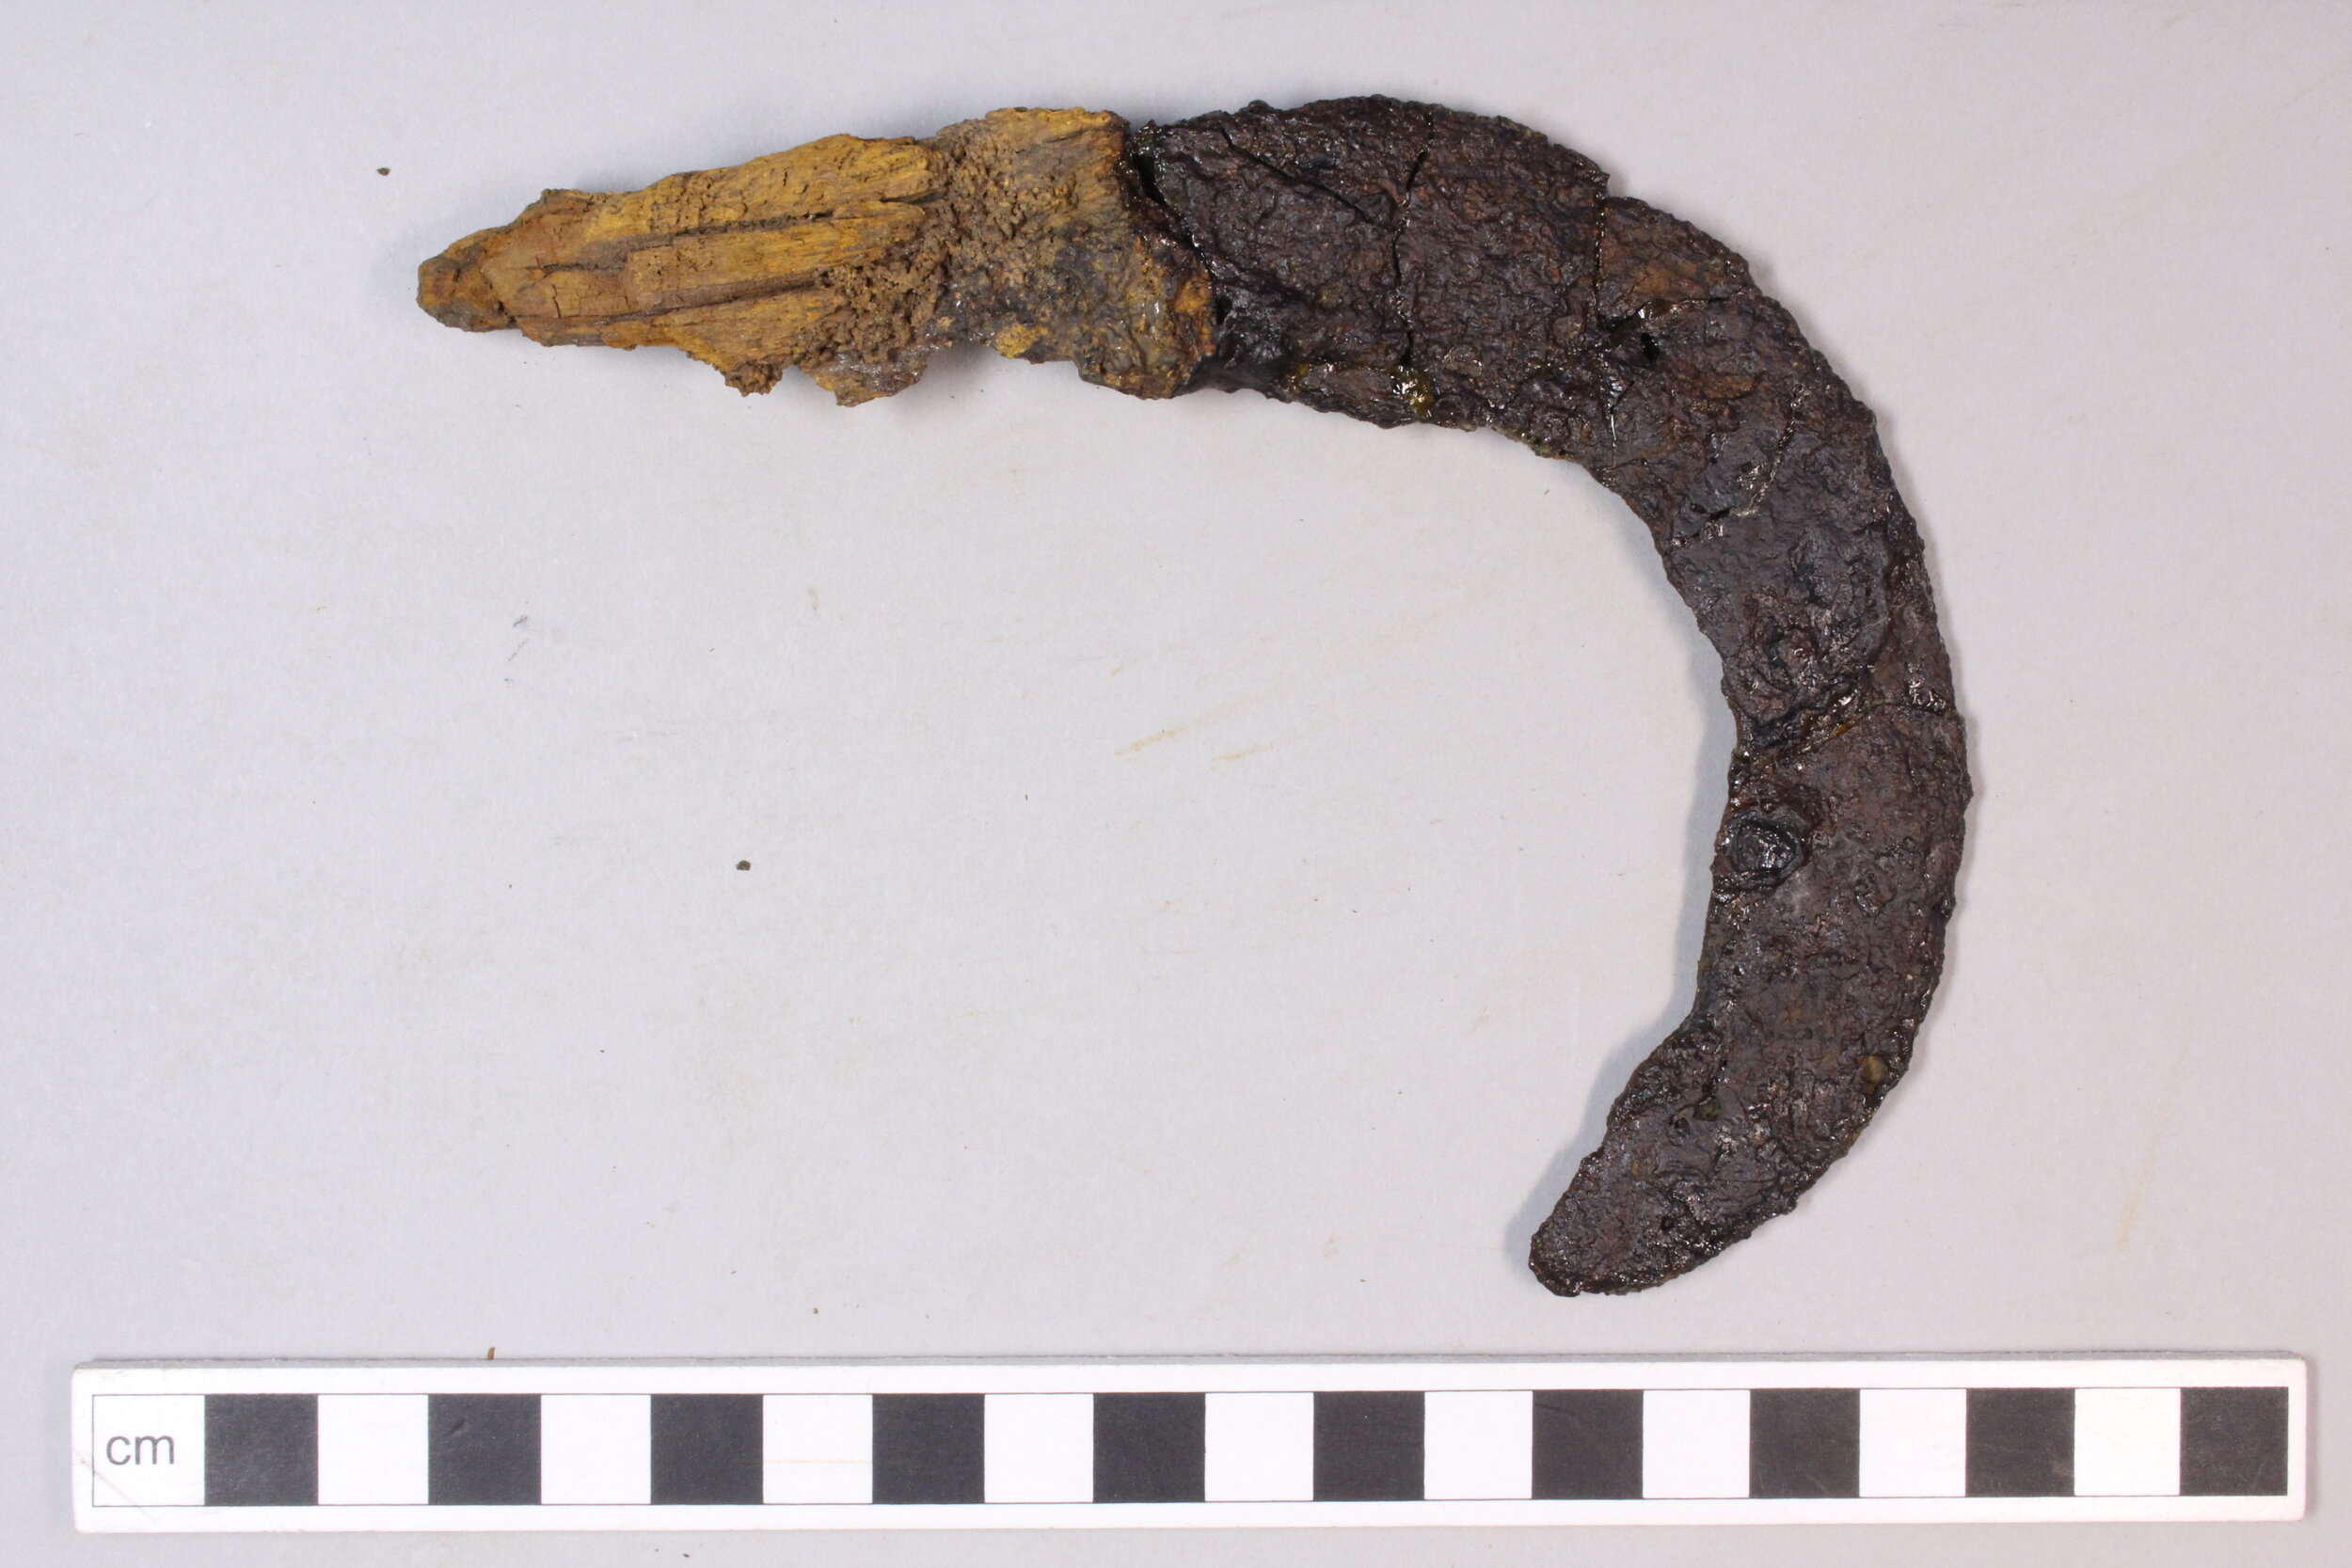   Reaping hook | Image: AOC Archaeology  